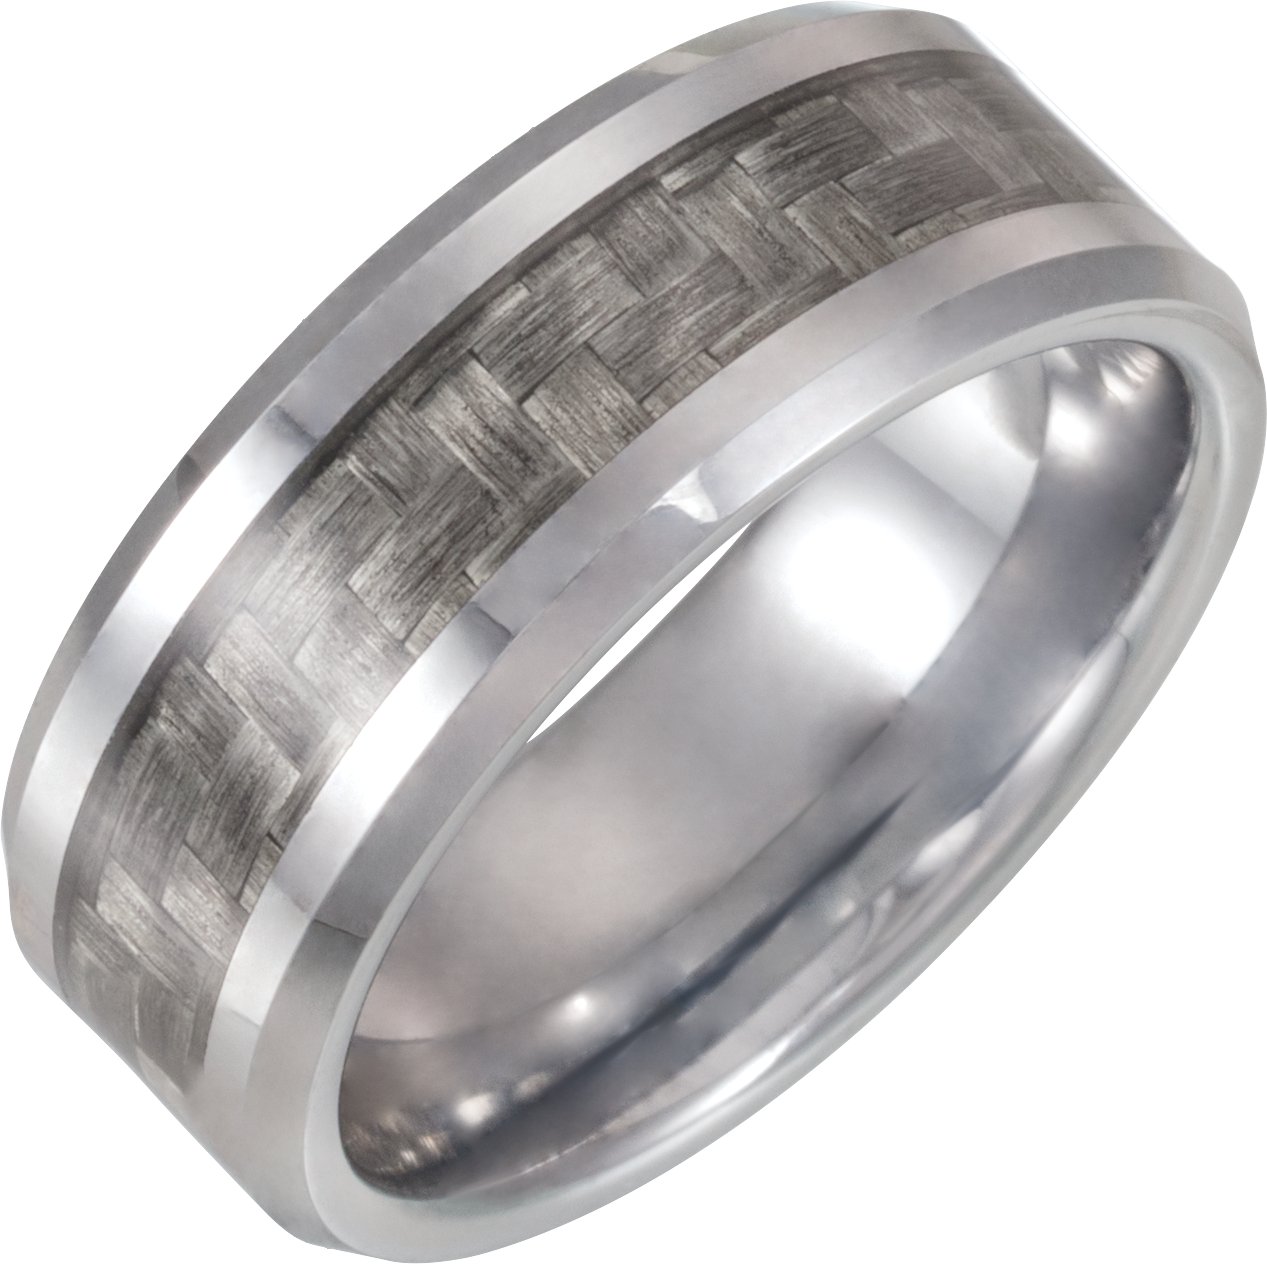 Tungsten 8 mm Band with Carbon Fiber Inlay Size 11